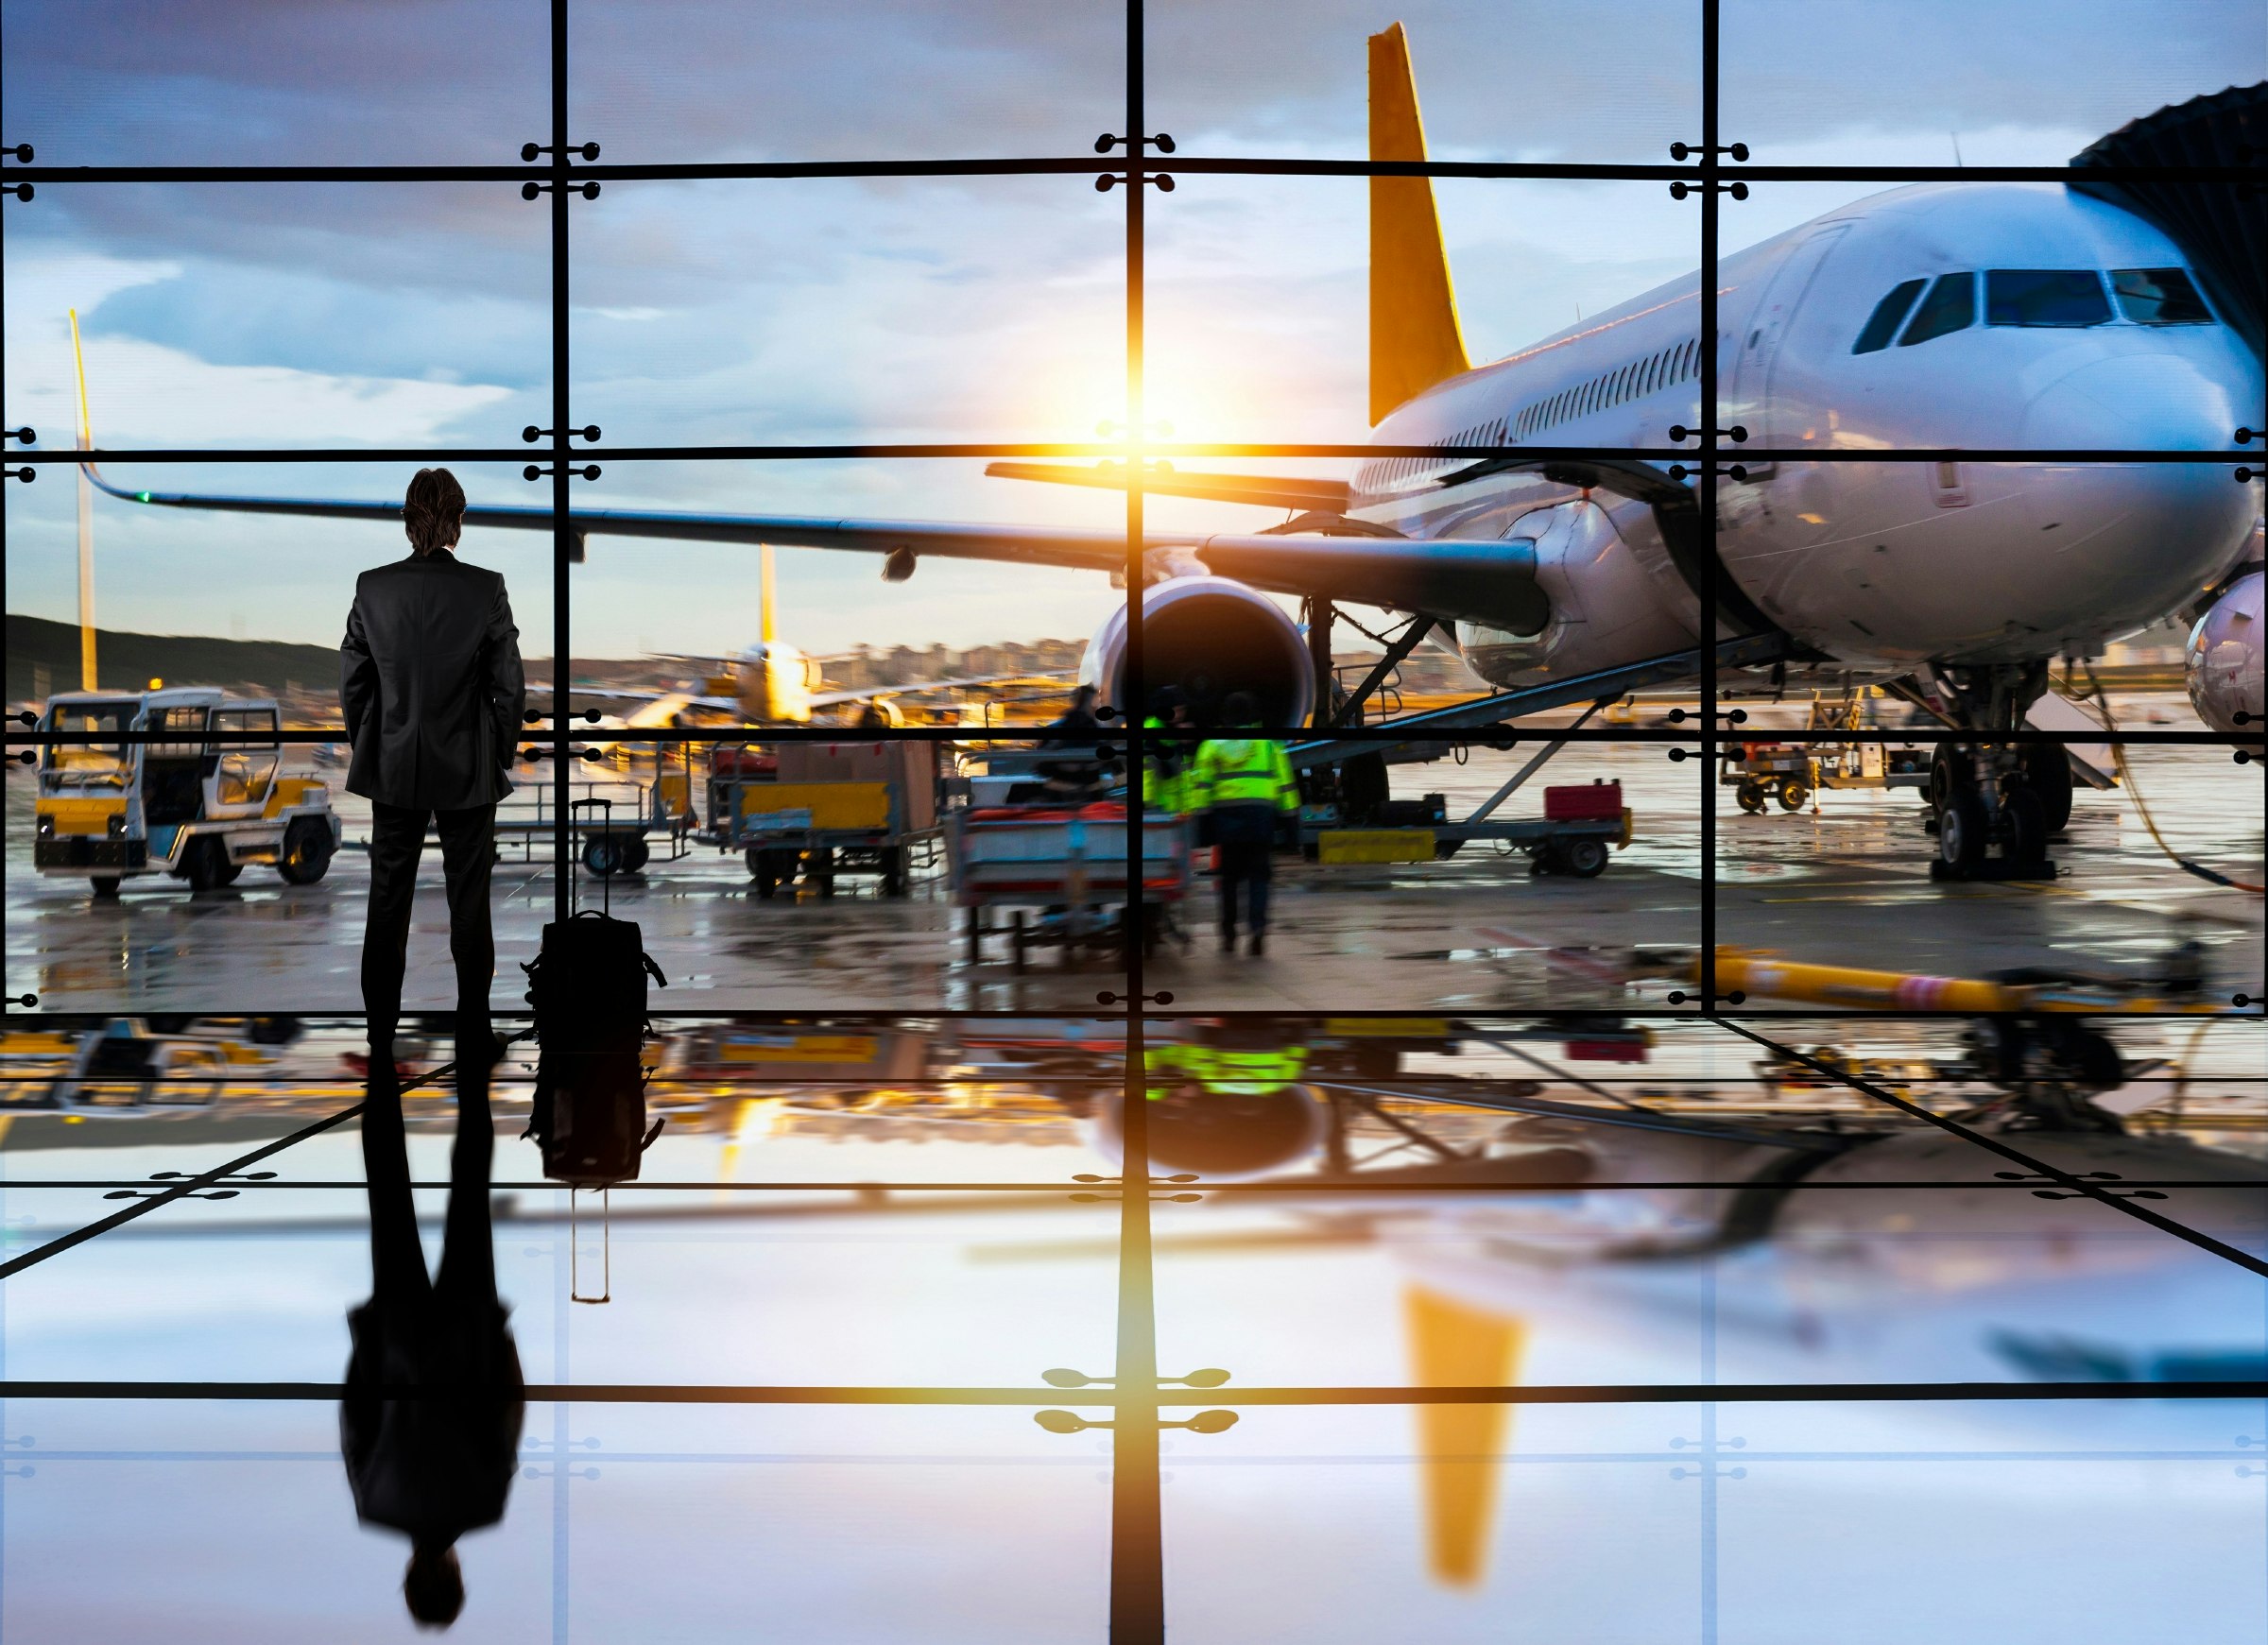 A man stands in an airport overlooking the loading of a plane